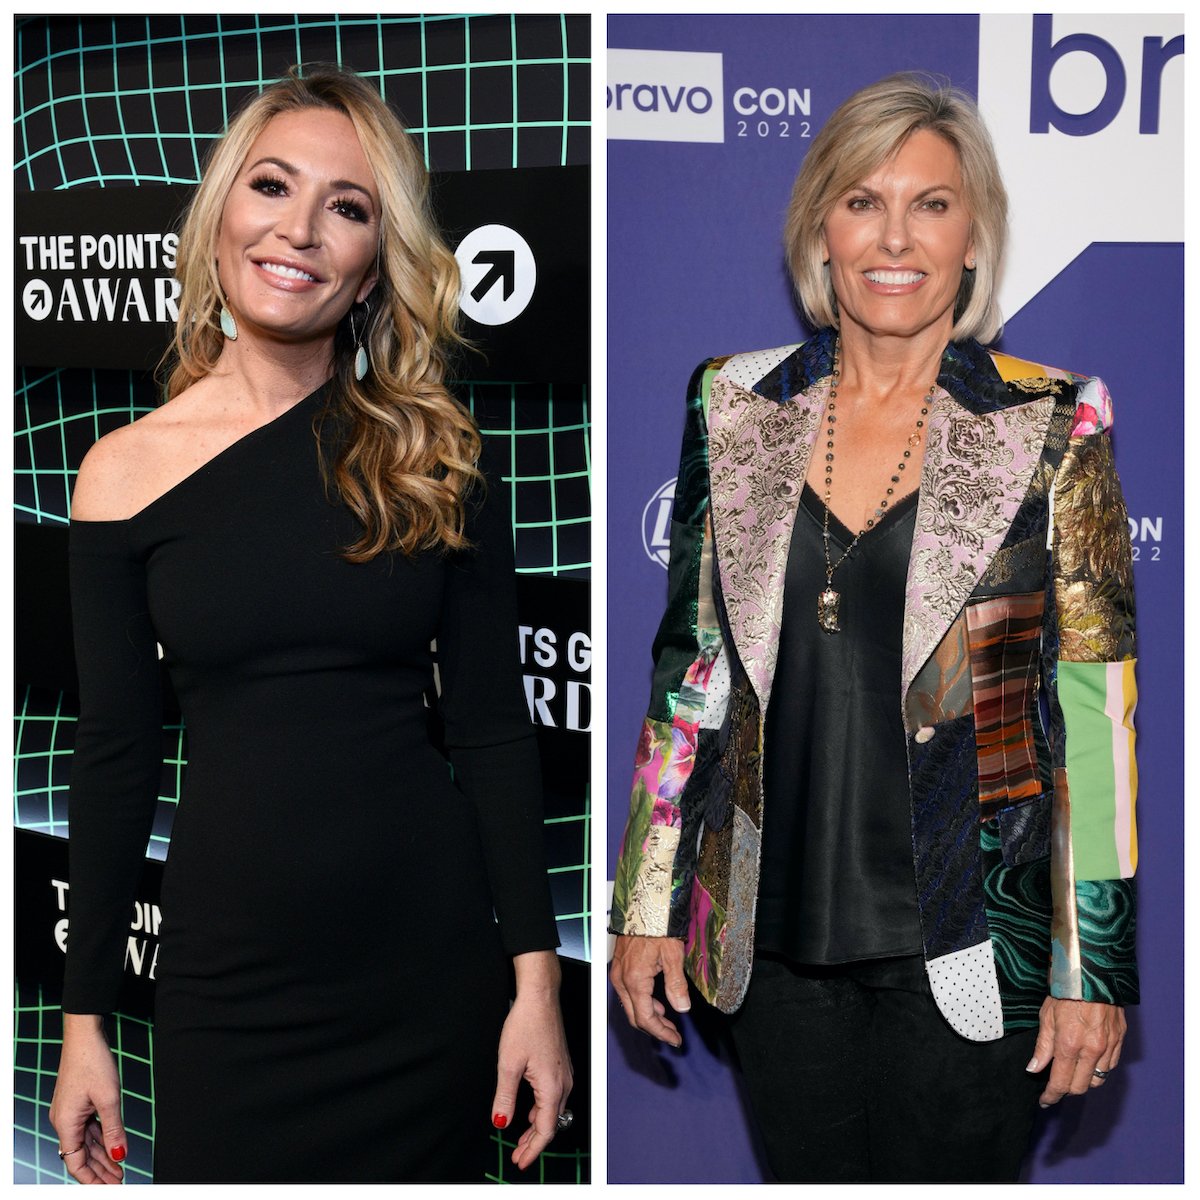 Kate Chastain walked the red carpet at a 2019 event. Captain Sandy Yawn at a BravoCon 2022 event